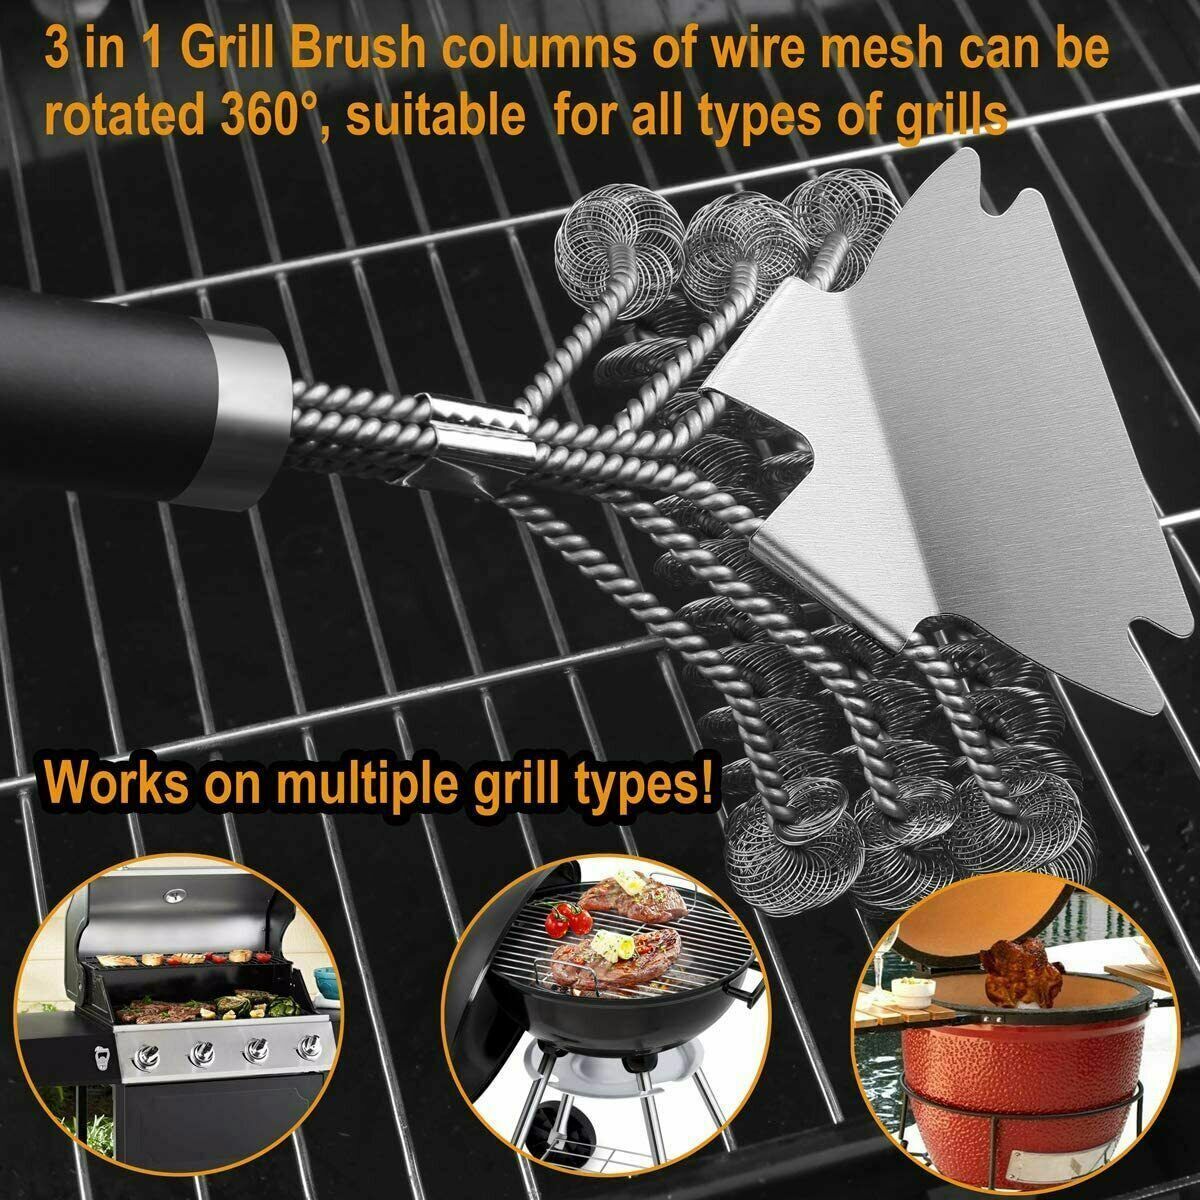 18in Grill BBQ Stainless Steel Cleaning Brush Bristle Free Safe with Scraper